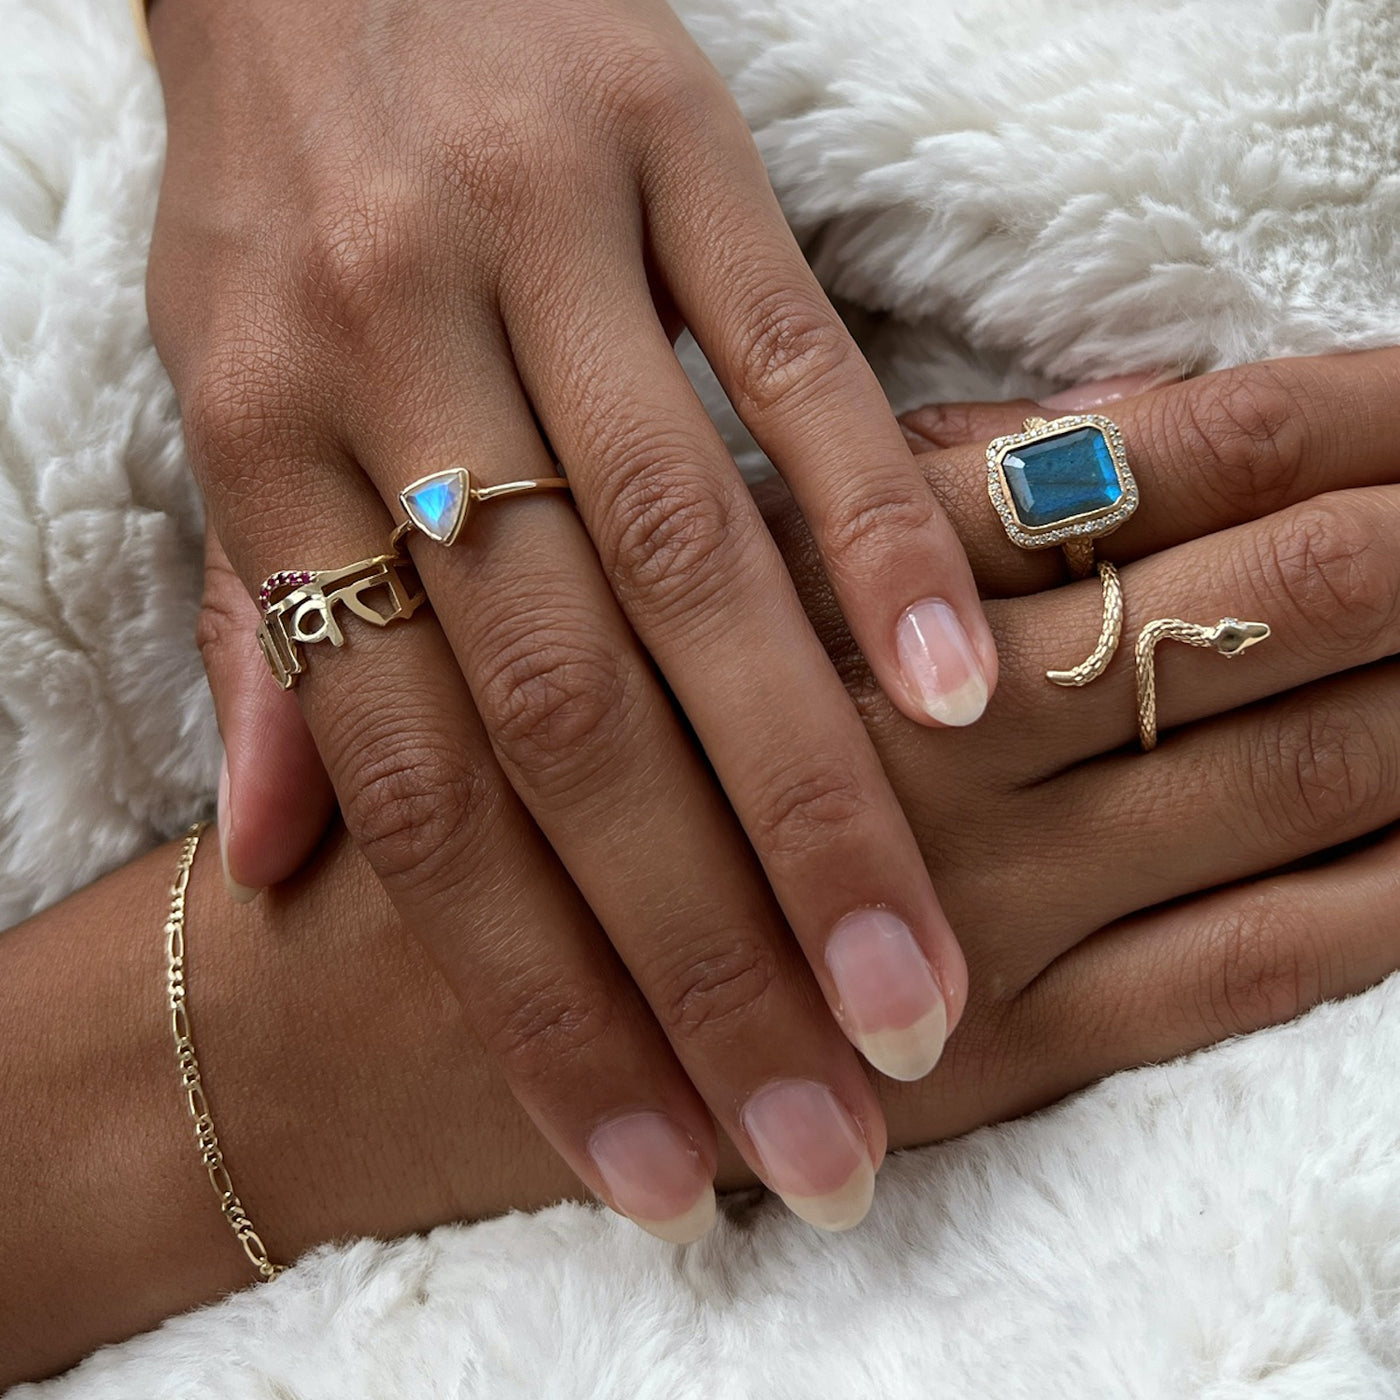 Hand model wearing multiple yellow gold rings. The first is a Sanskrit ring with rubies, the second is a trillion cut moonstone, the third is a emerald cut labradorite and the last is a textured gold snake ring.